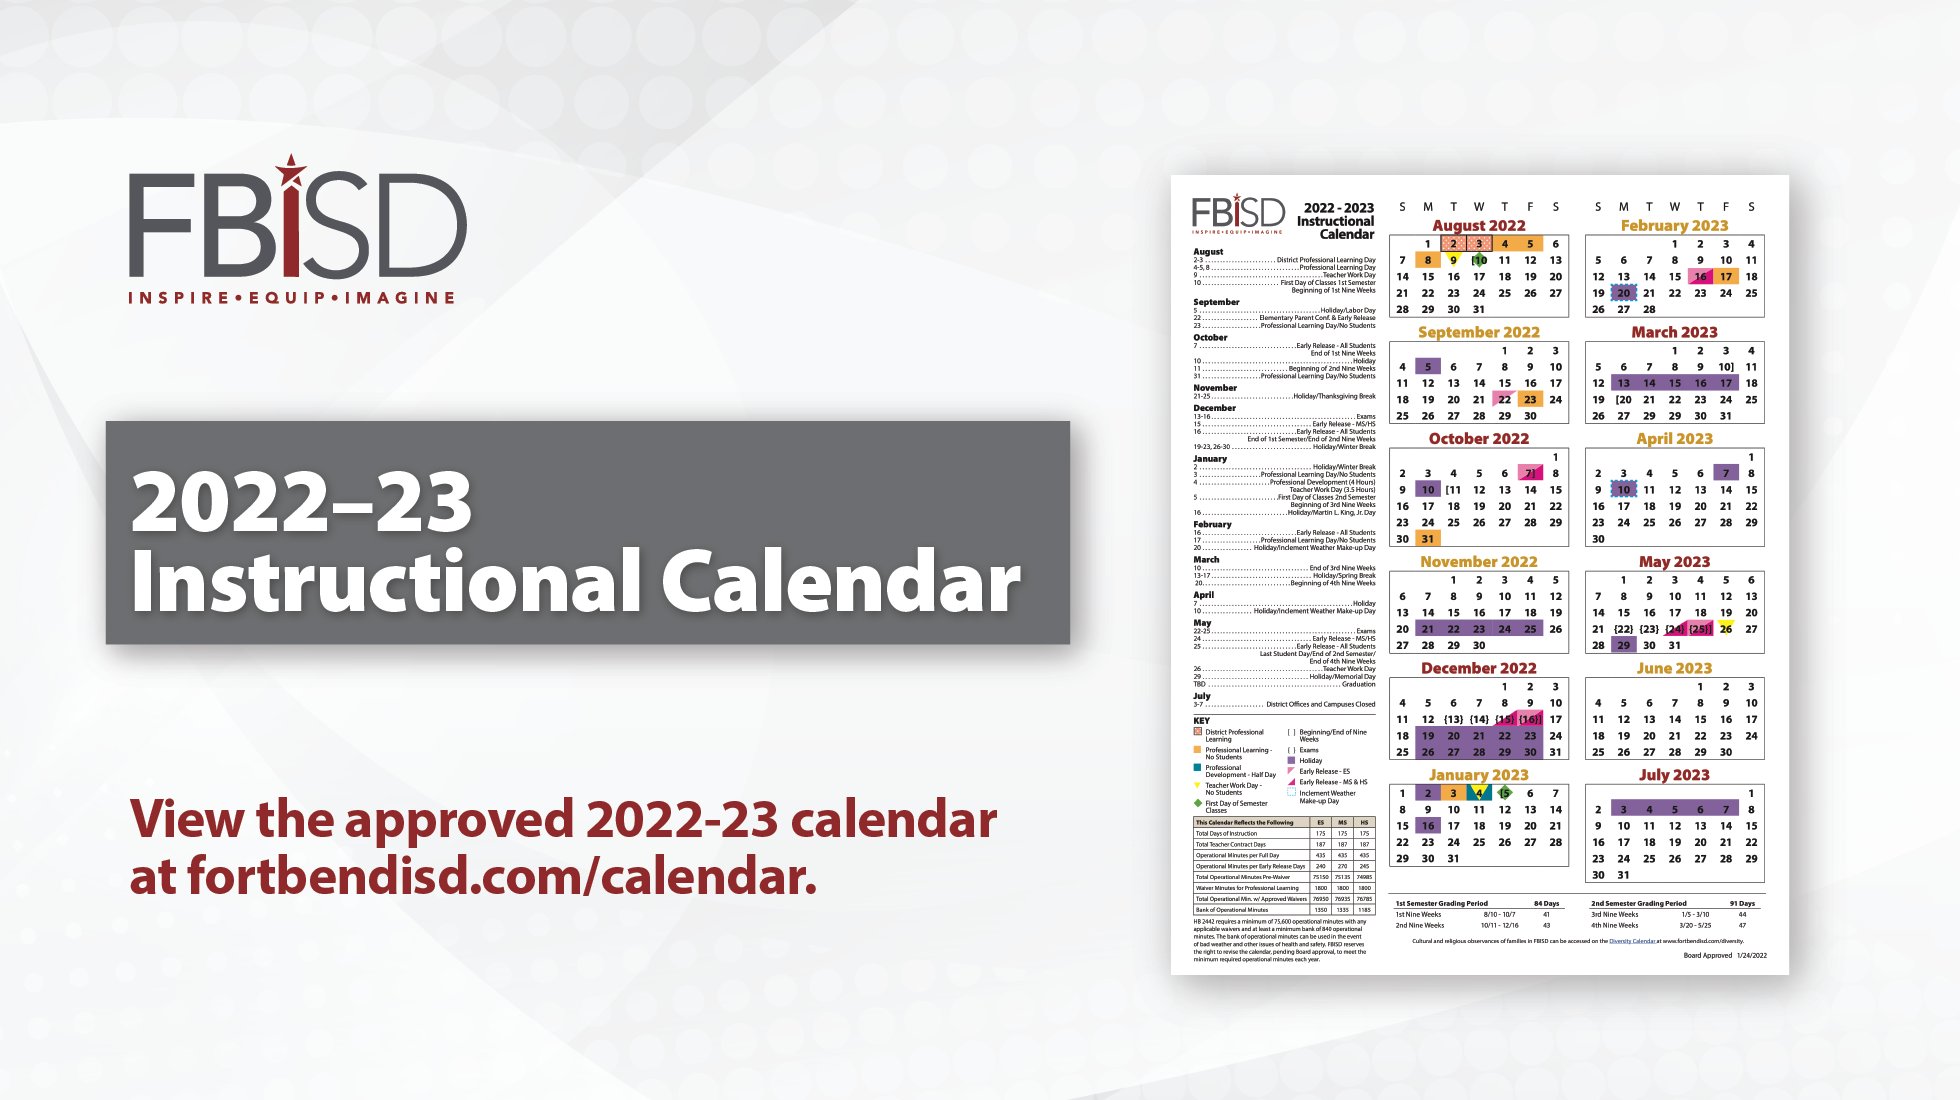 Fbisd Calendar 2022 Fort Bend Isd On Twitter: "The 2022-23 Instructional Calendar Has Been  Approved By The Fort Bend Isd Board Of Trustees. 📅 View The Approved 2022-23  Calendar At Https://T.co/Sussnjxanh. Https://T.co/Y4Gaewjwxc" / Twitter